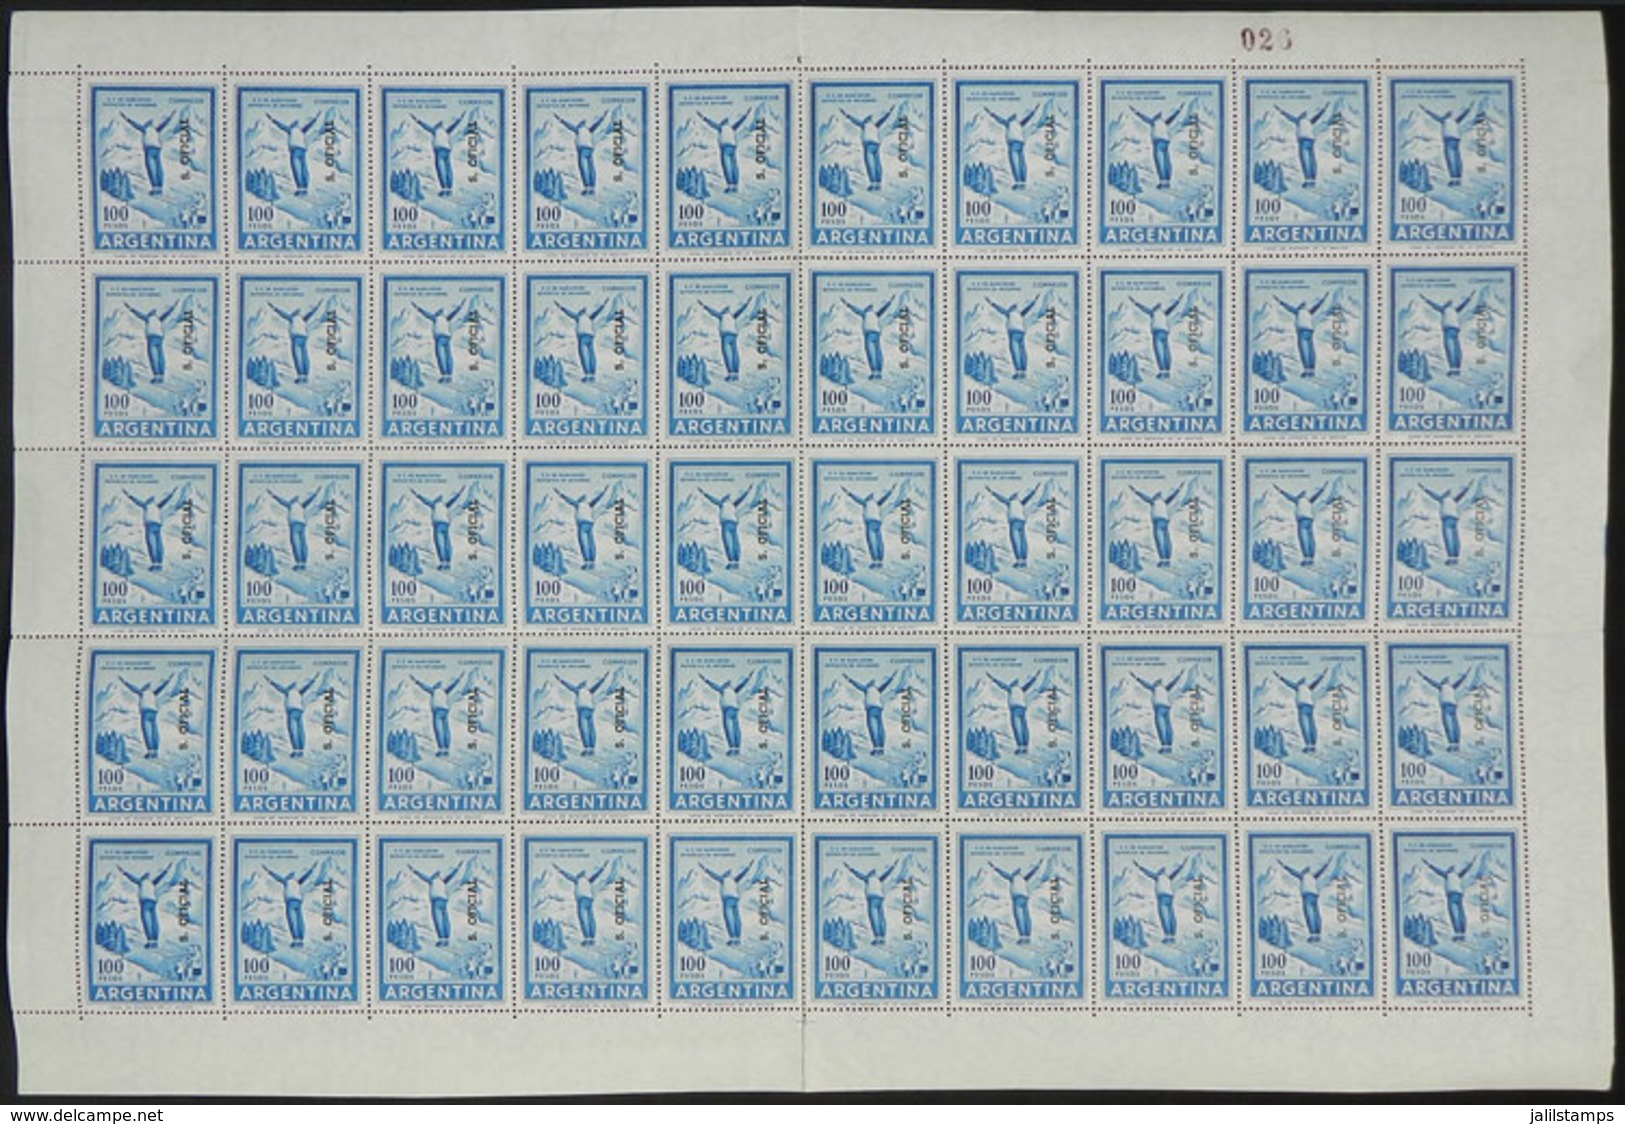 296 ARGENTINA: GJ.774, 100P. Ski, On Imported Unsurfaced Paper, Complete Sheet Of 50 Stamps, MNH, Excellent And Very Rar - Service